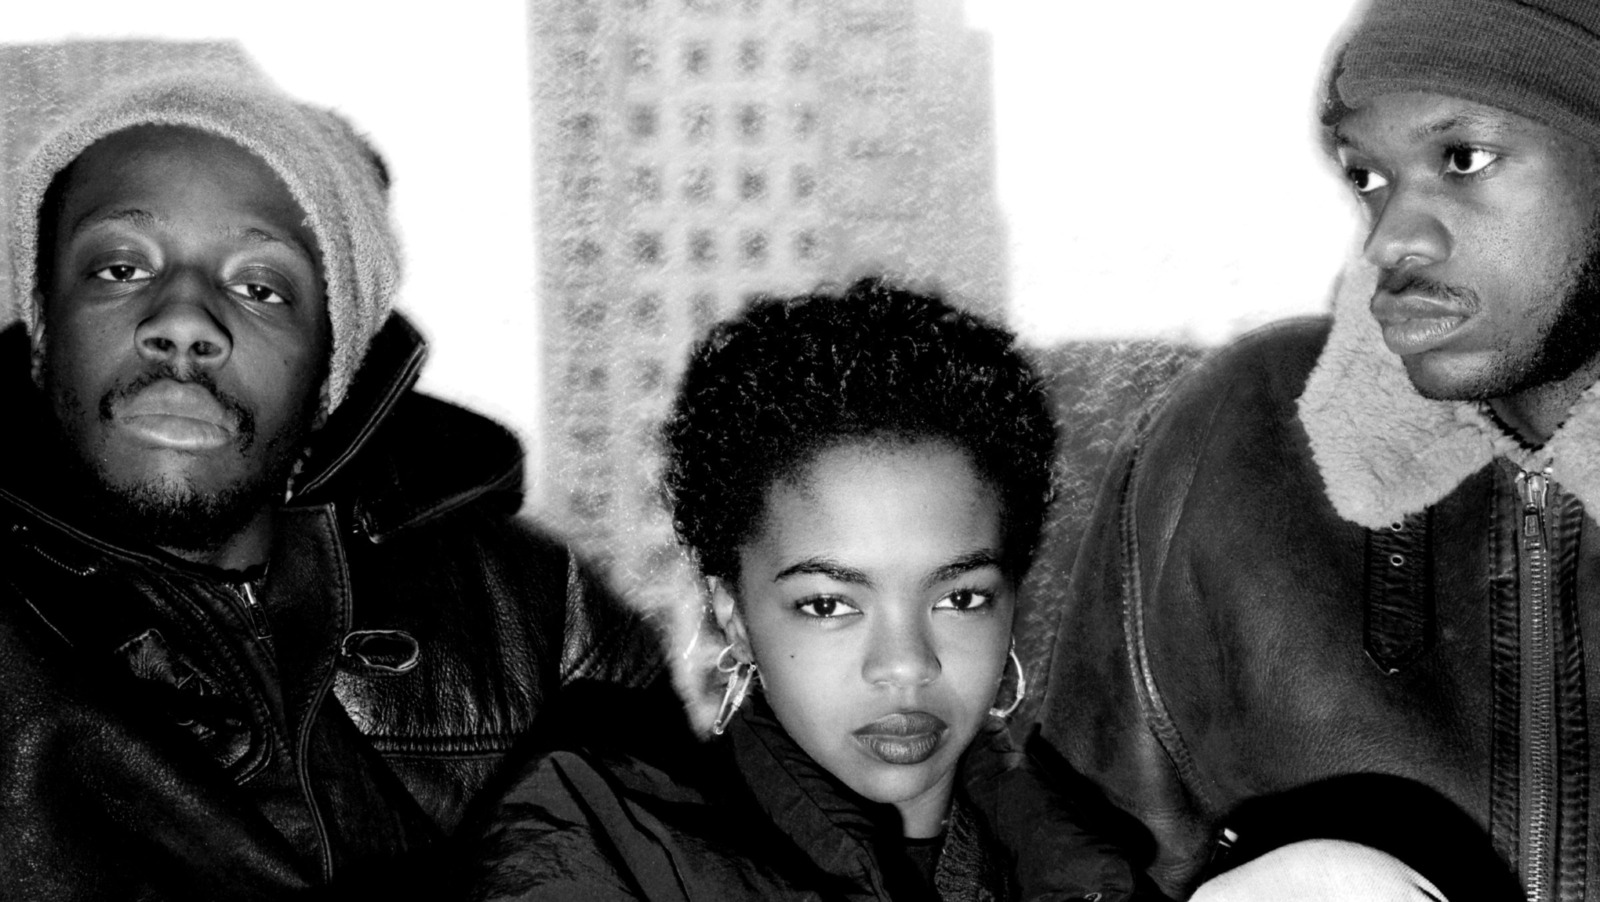 Fugees Wallpapers